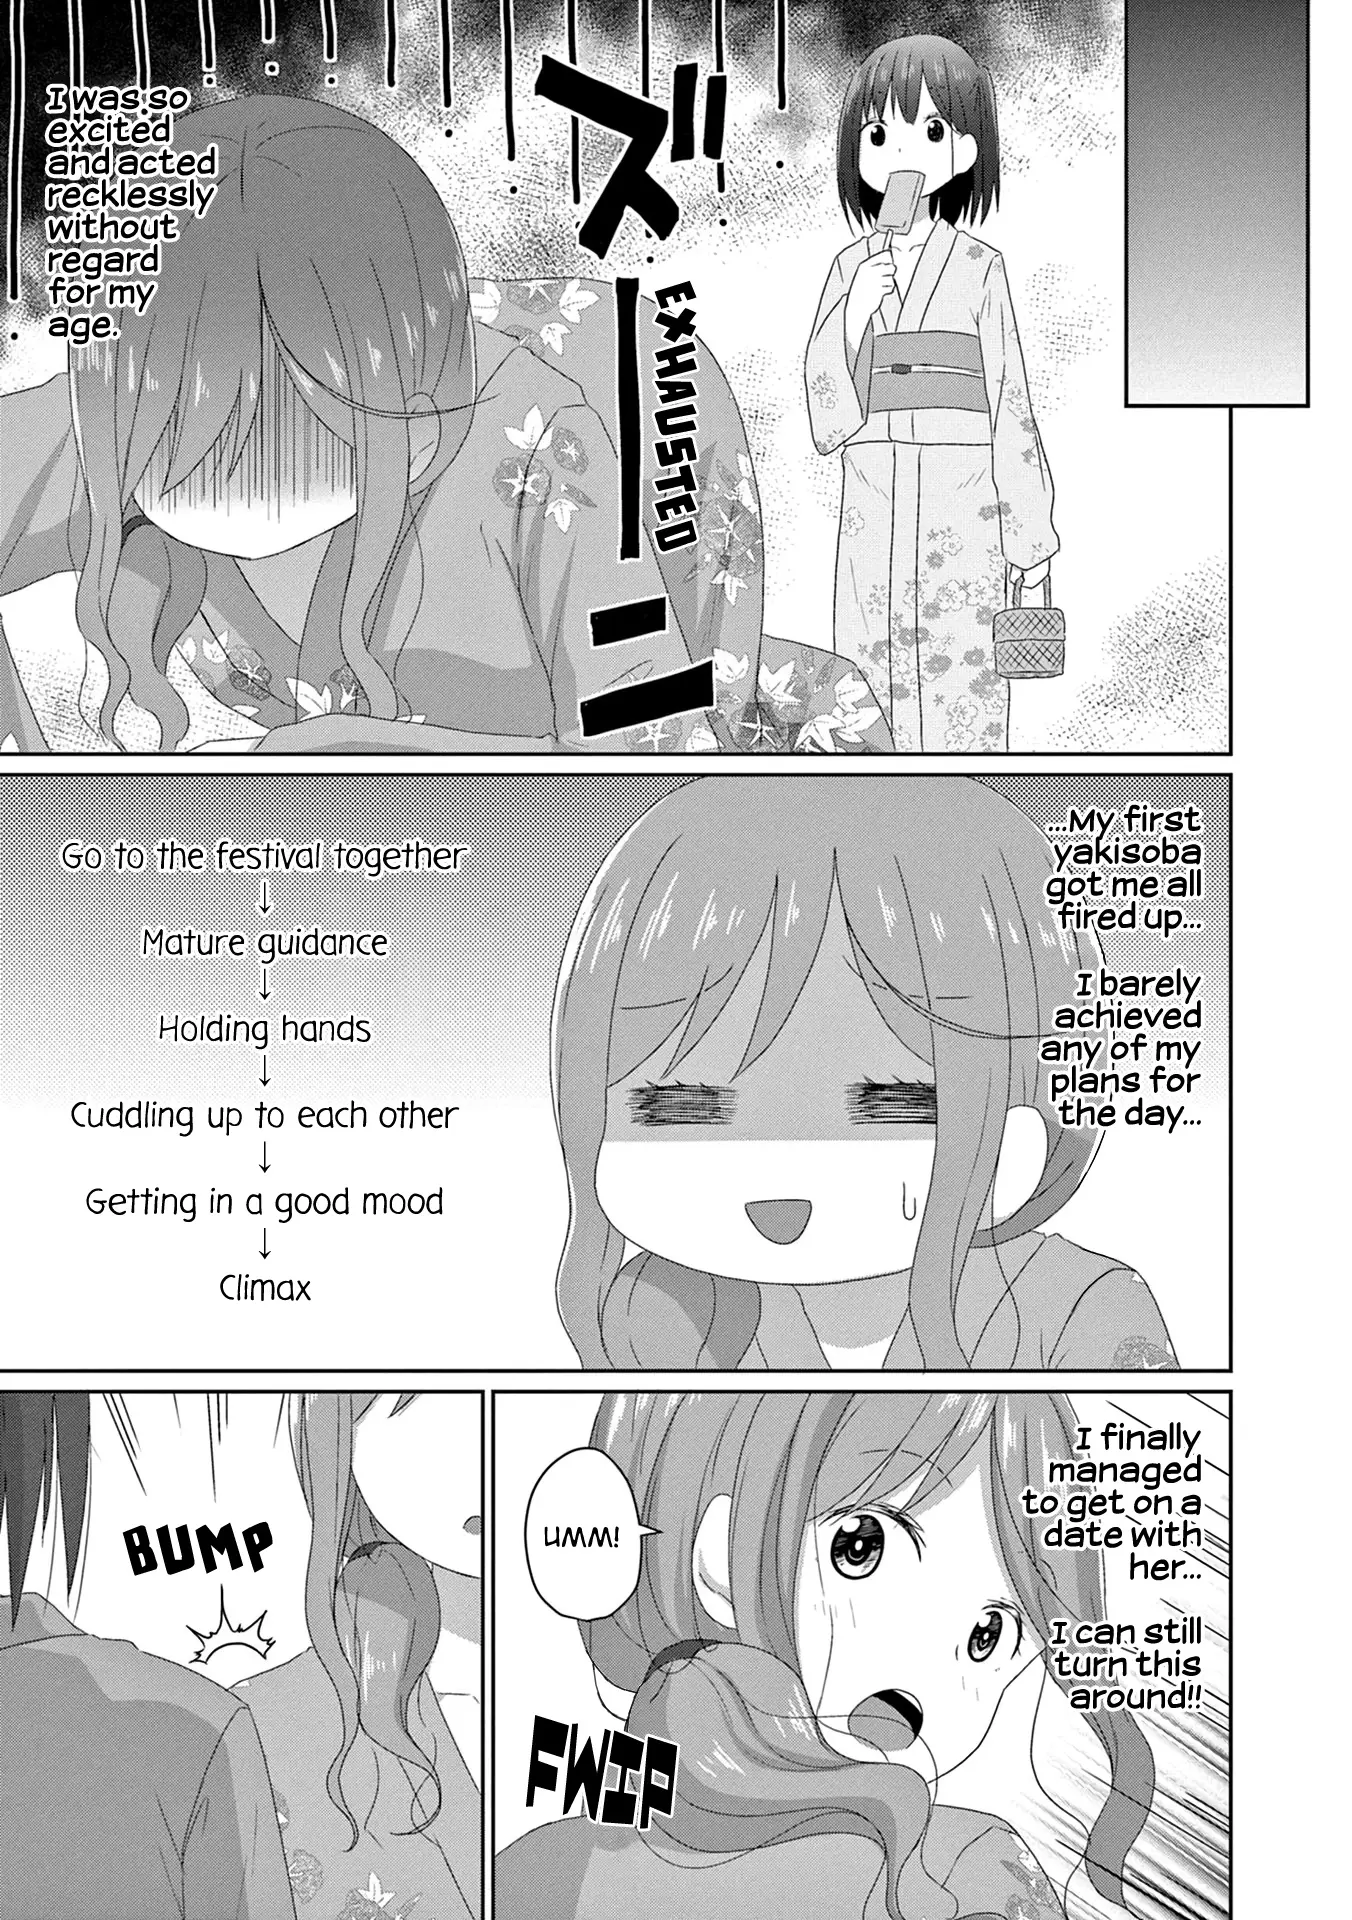 Js-San To Ol-Chan - 15 page 9-f0ad1677